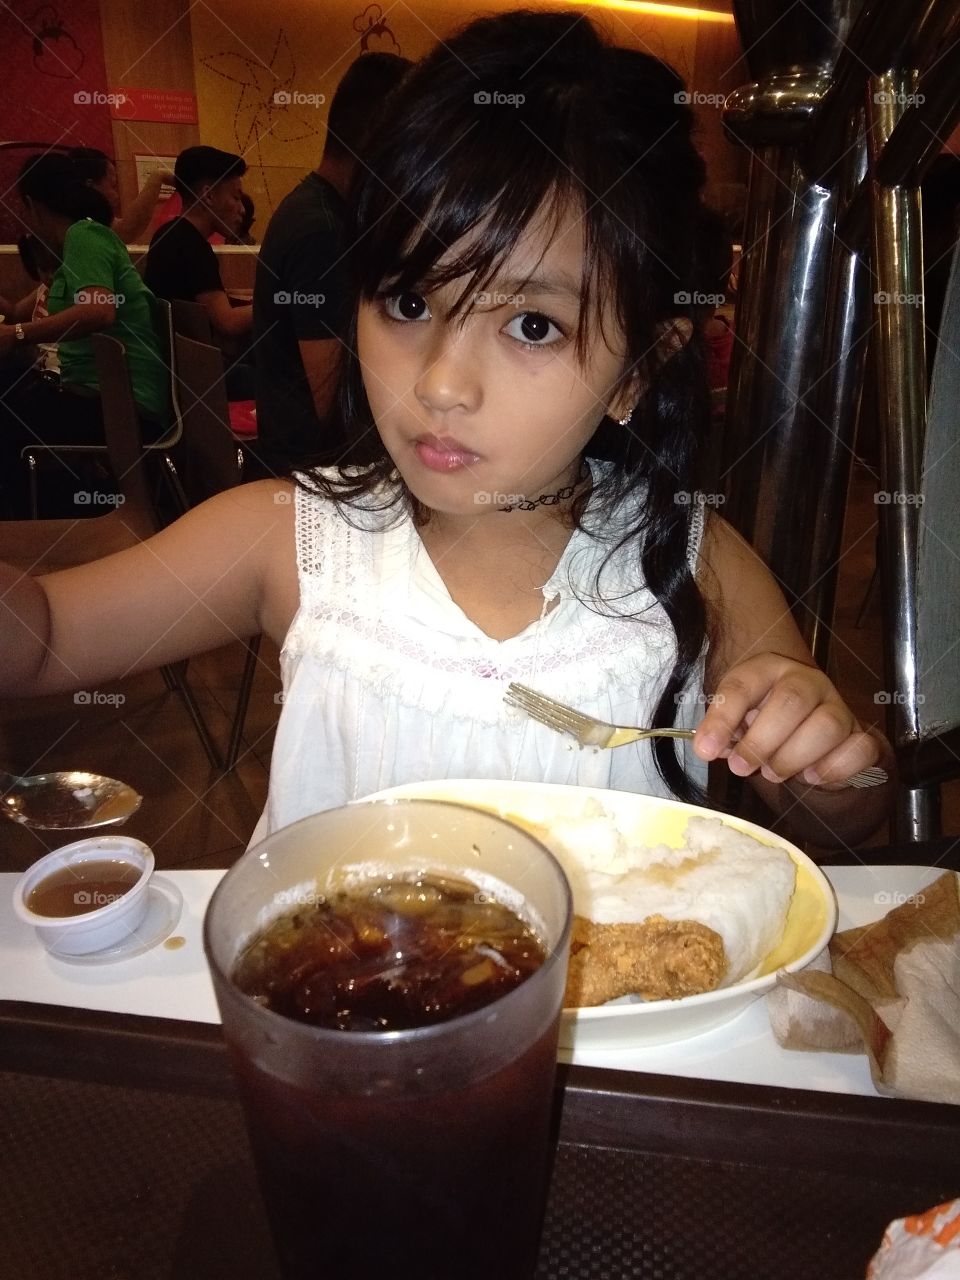 its dineer time with my cute doughter